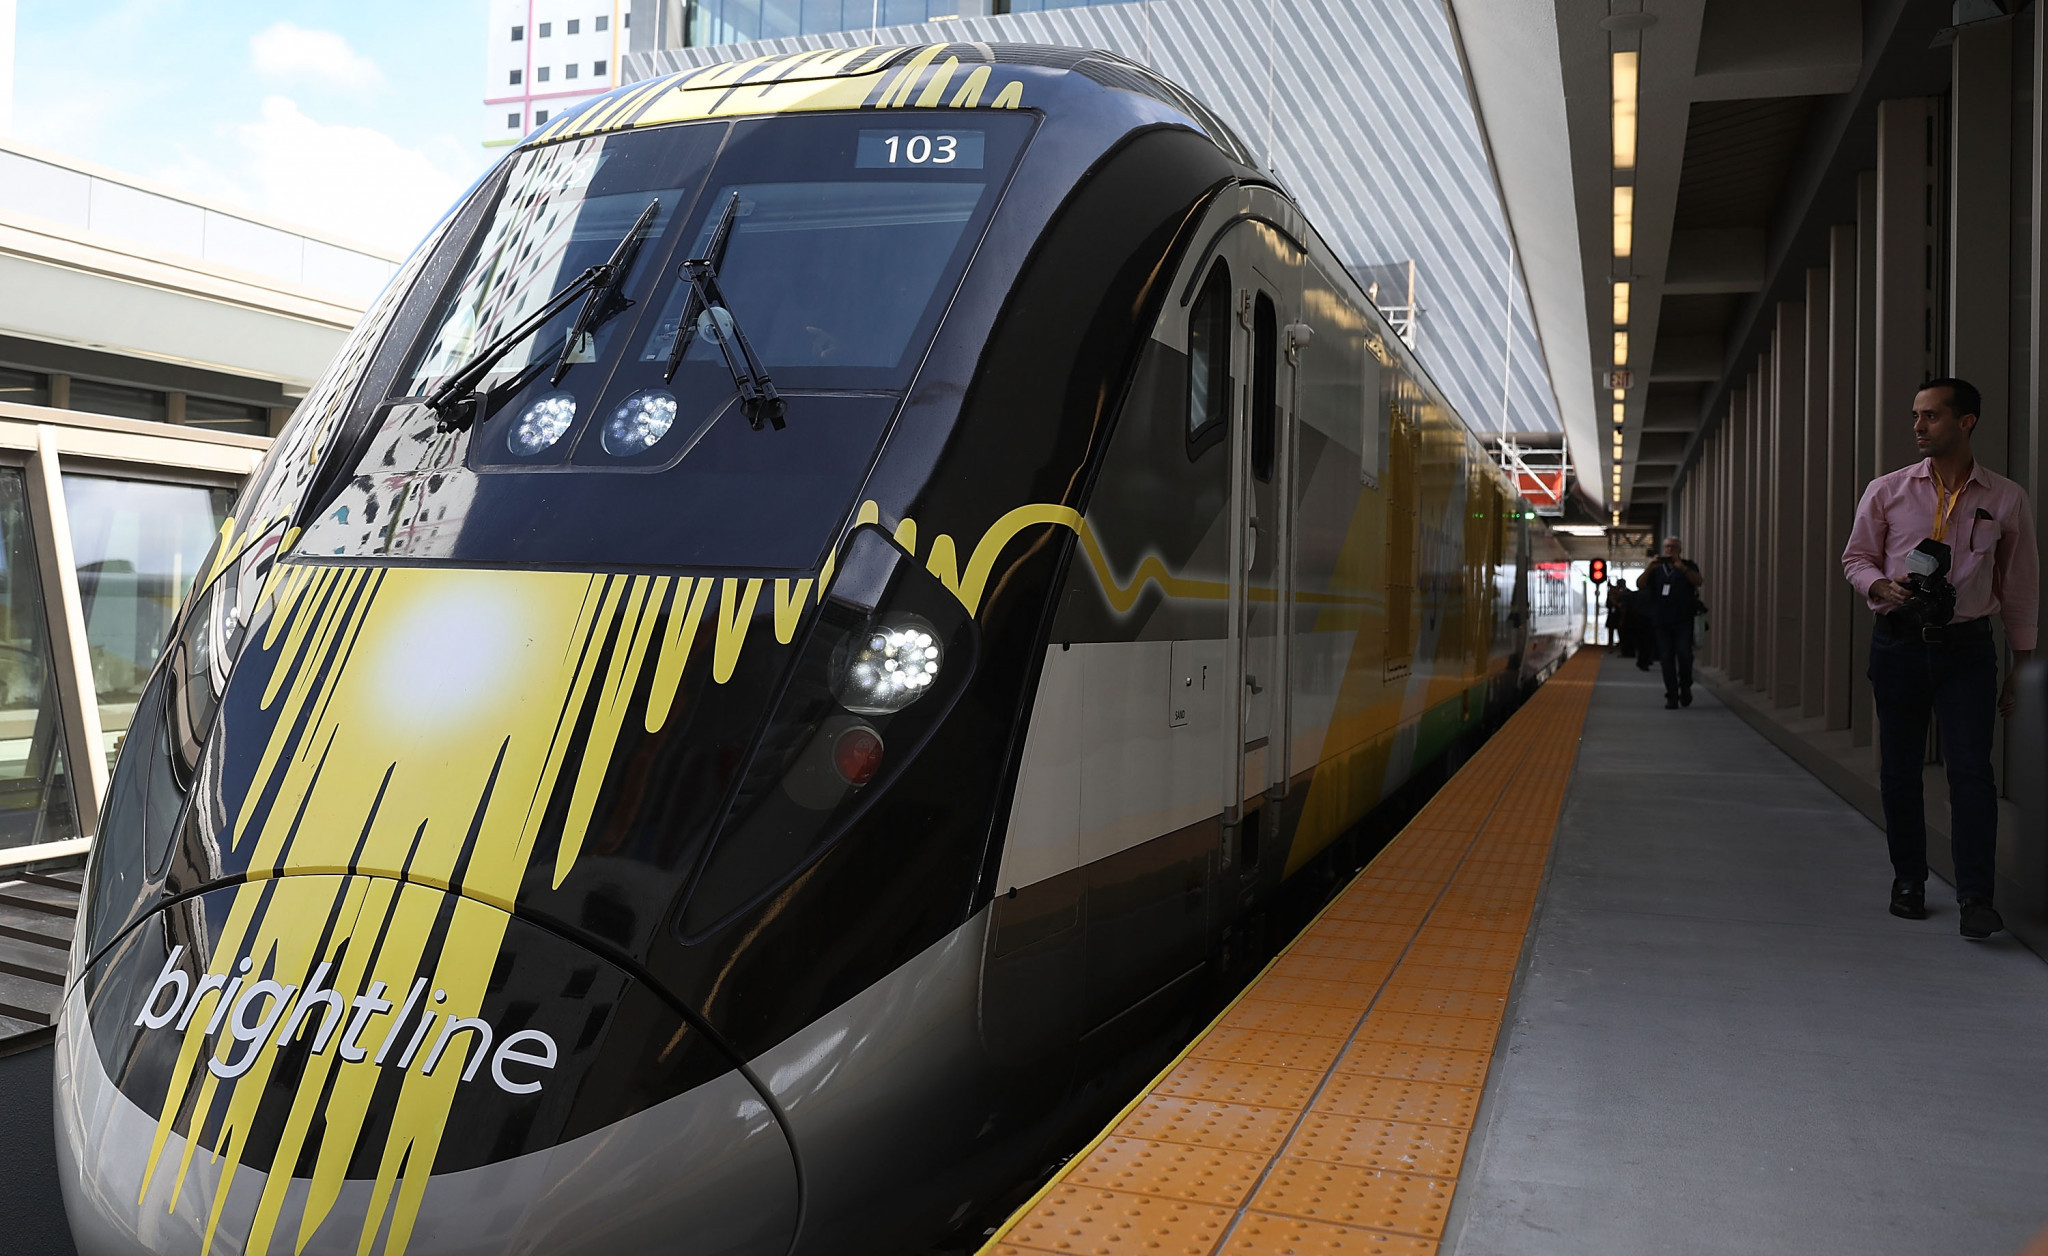 Brightline owner suggests high-speed train link could give Las Vegas role for Los Angeles 2028